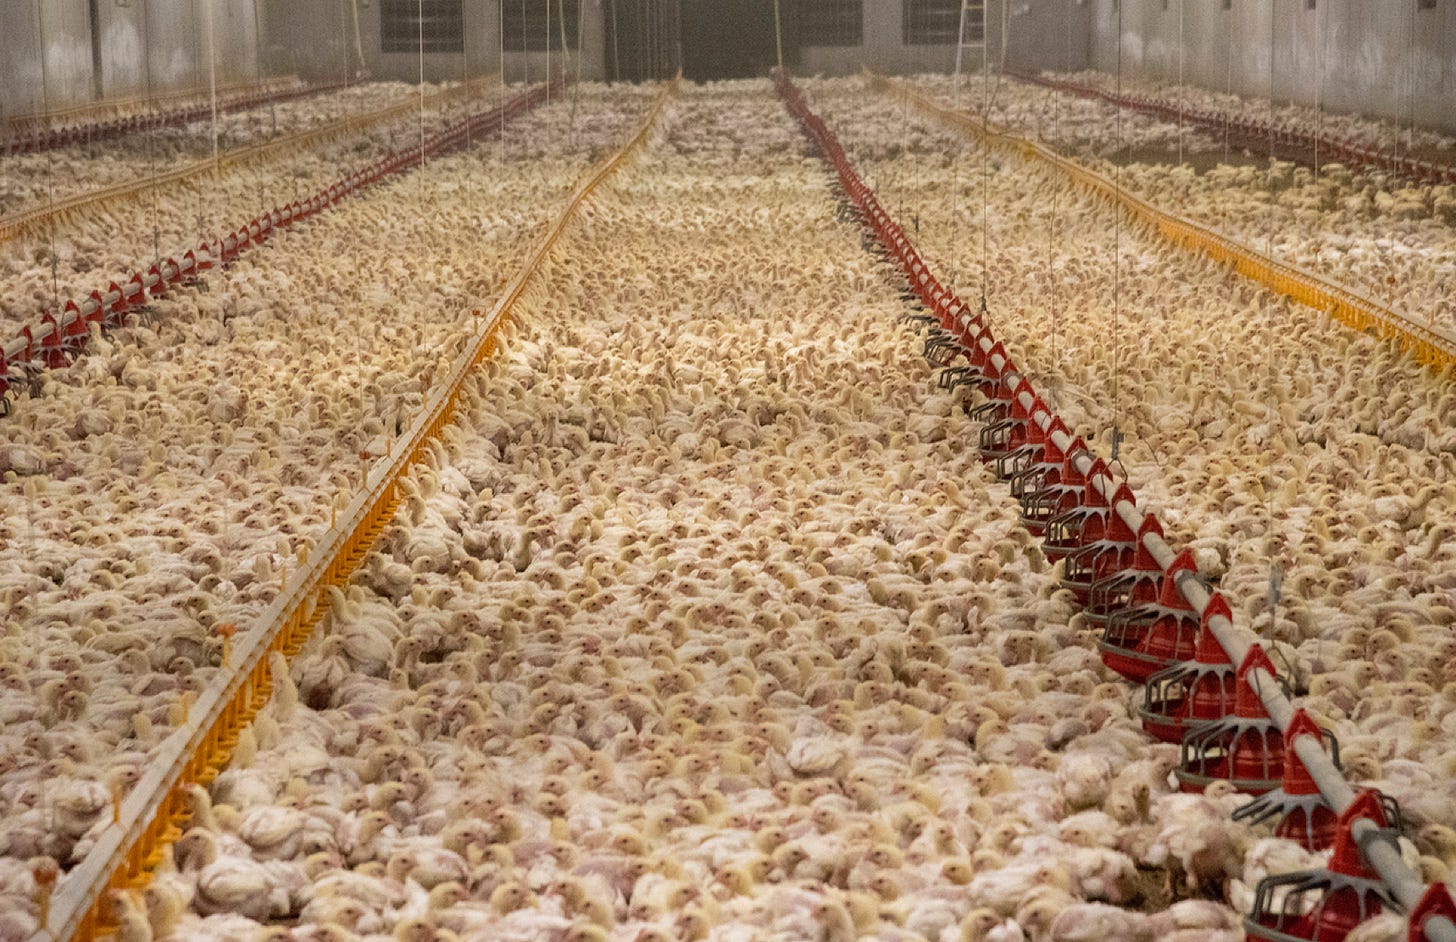 What Really Happens on a Chicken Farm?